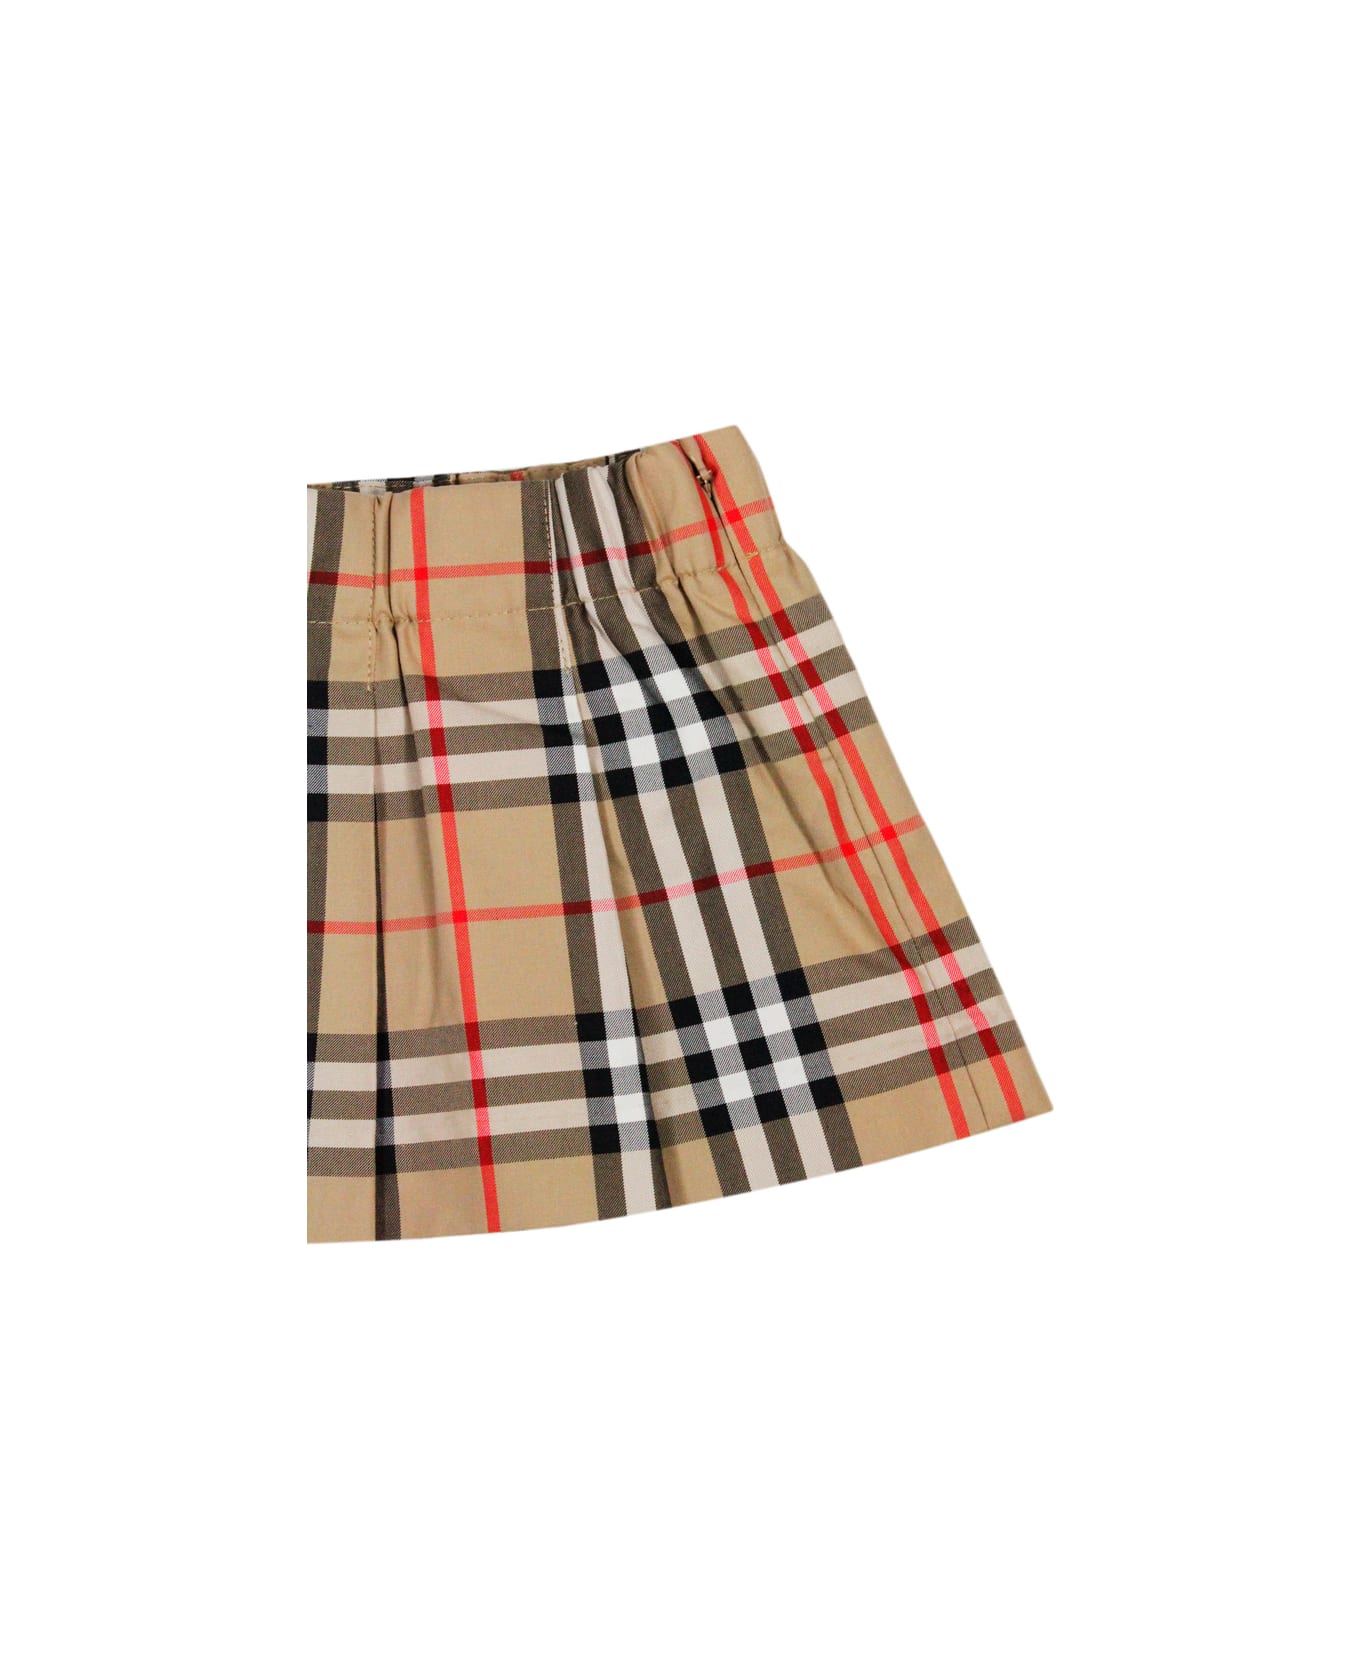 Burberry Pleated Cotton Skirt With Check Pattern With Elastic Waist And Side Zip Closure - Beige ボトムス